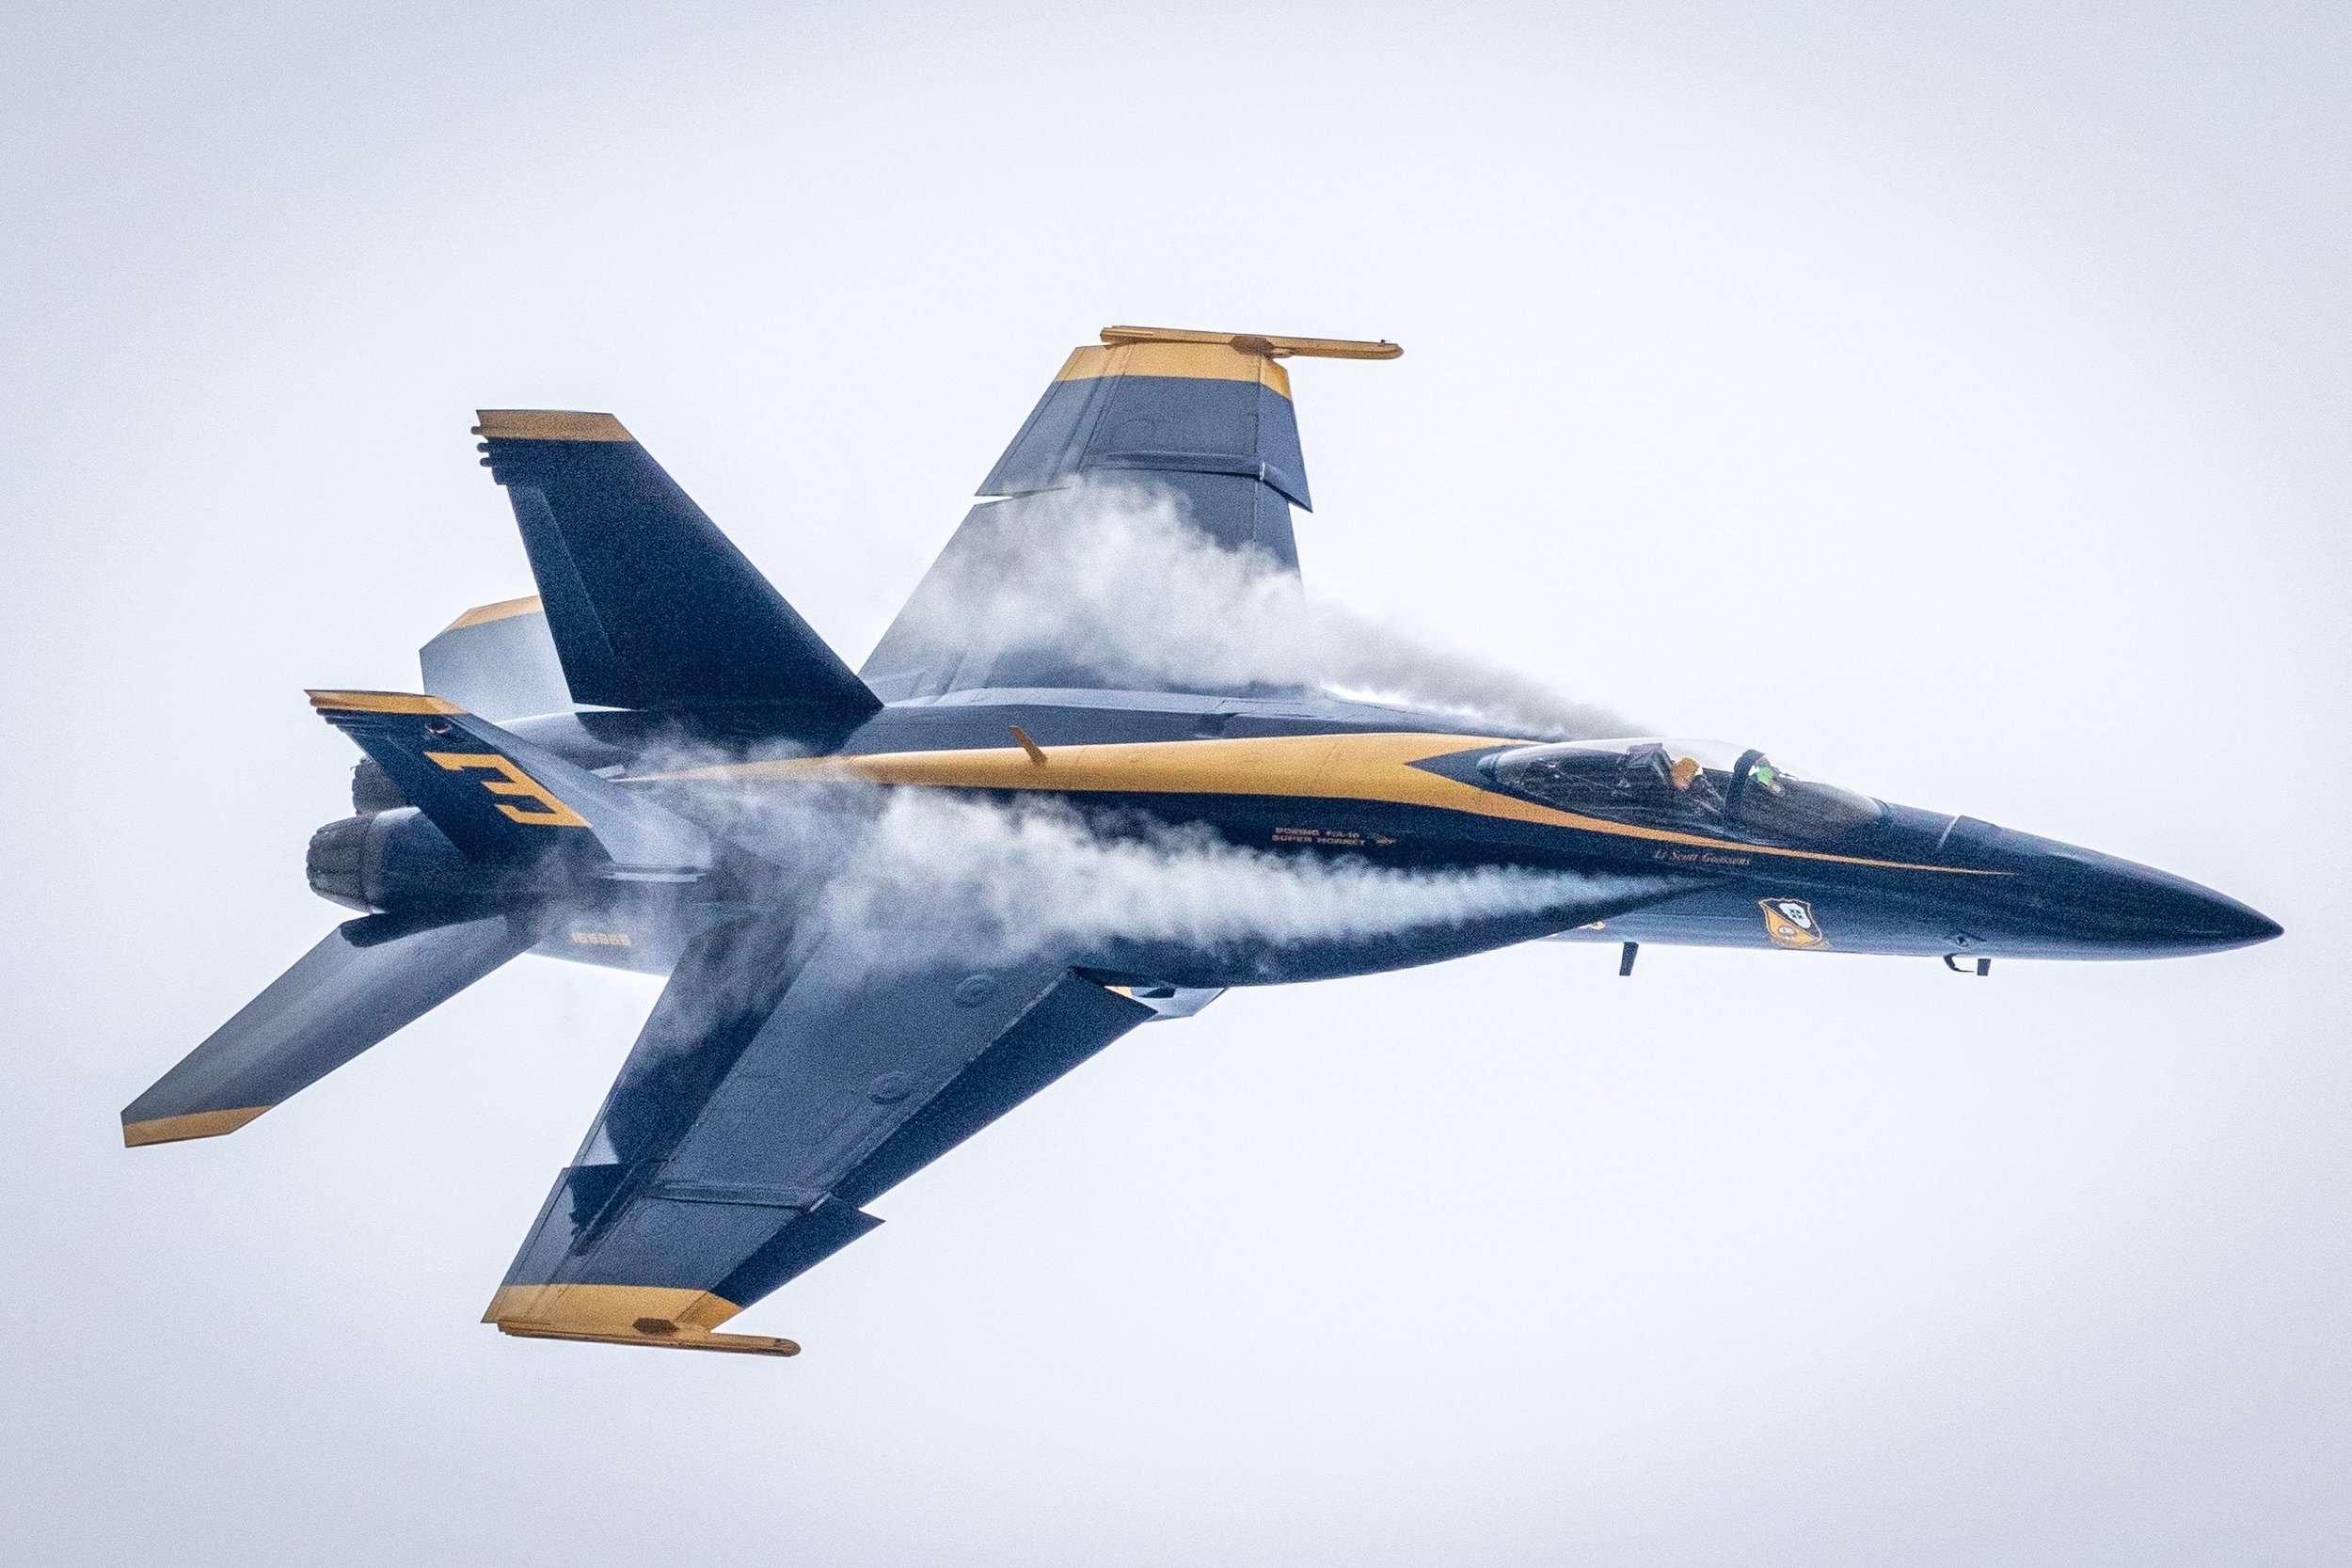 F/A-18 Super Hornet, with transonic vapor on wings